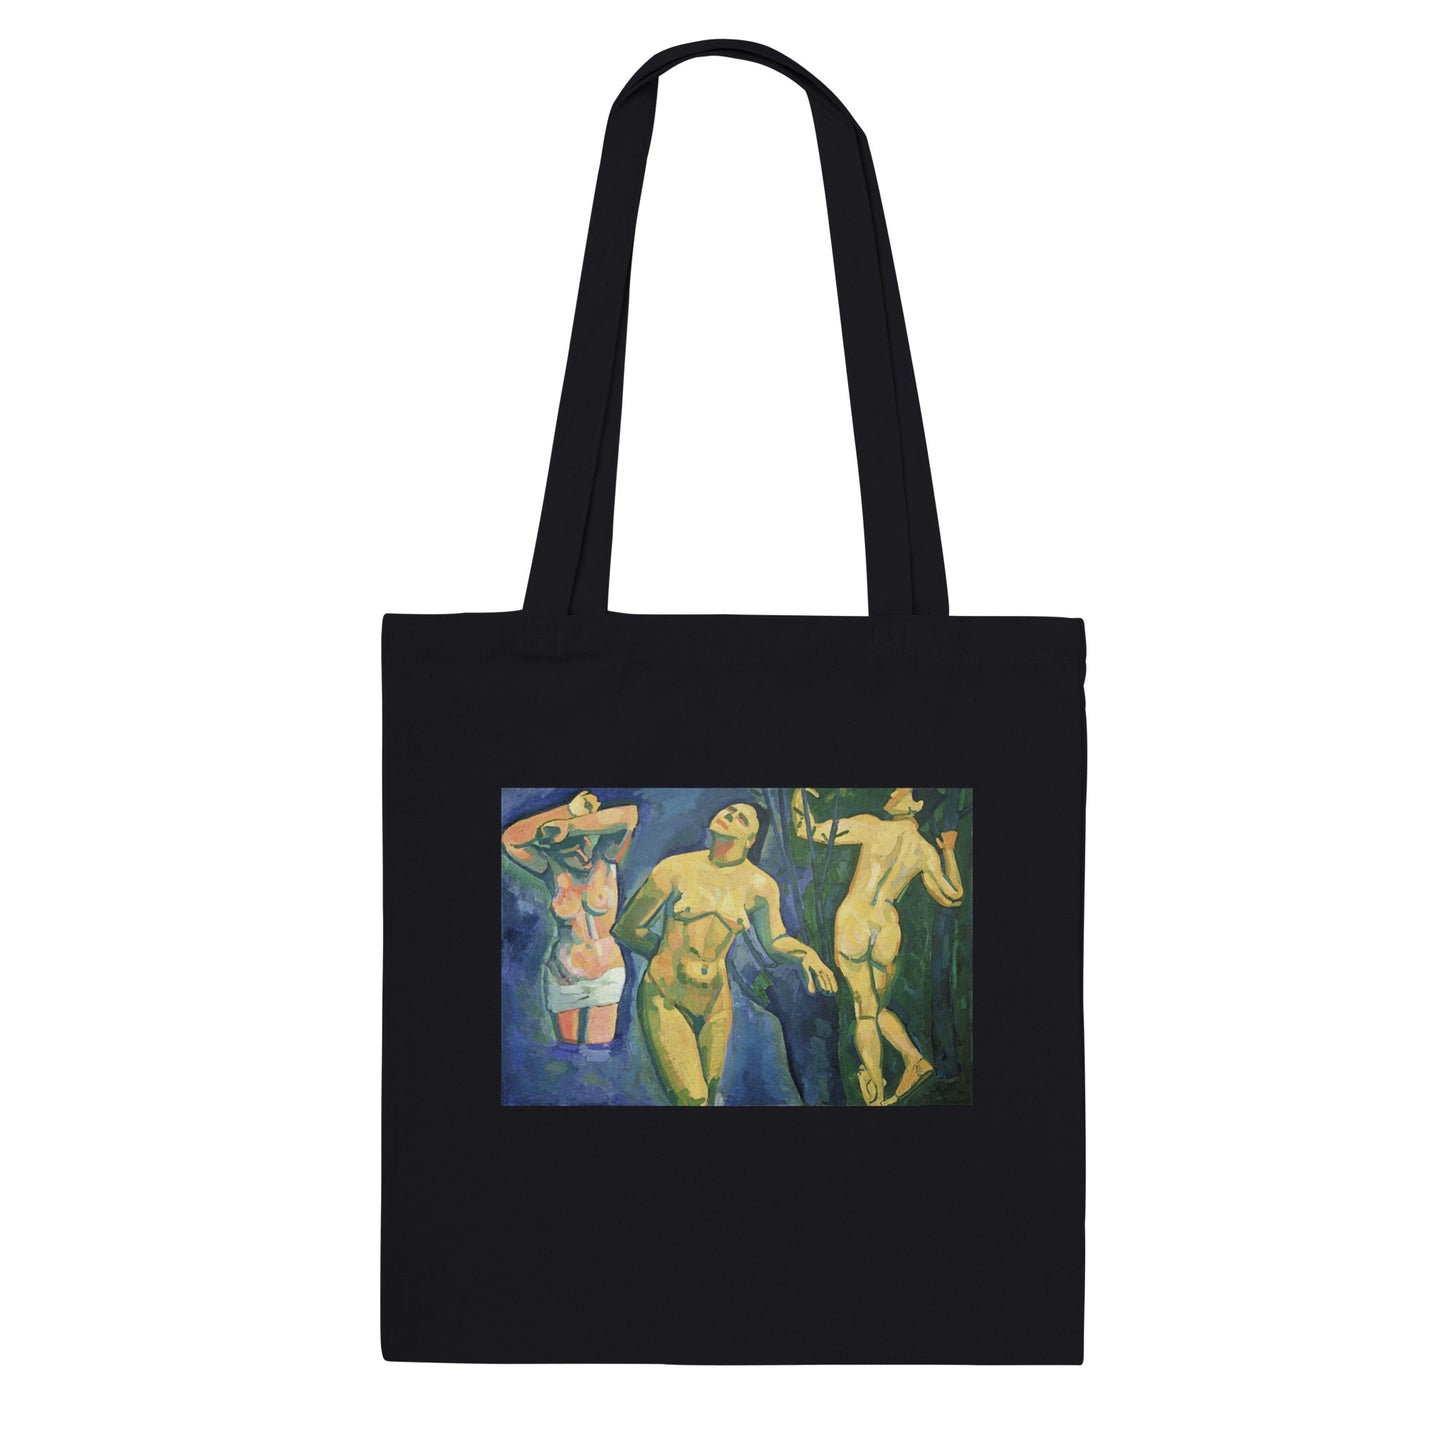 ANDRE DERAIN - THE BATHERS - CLASSIC TOTE BAG